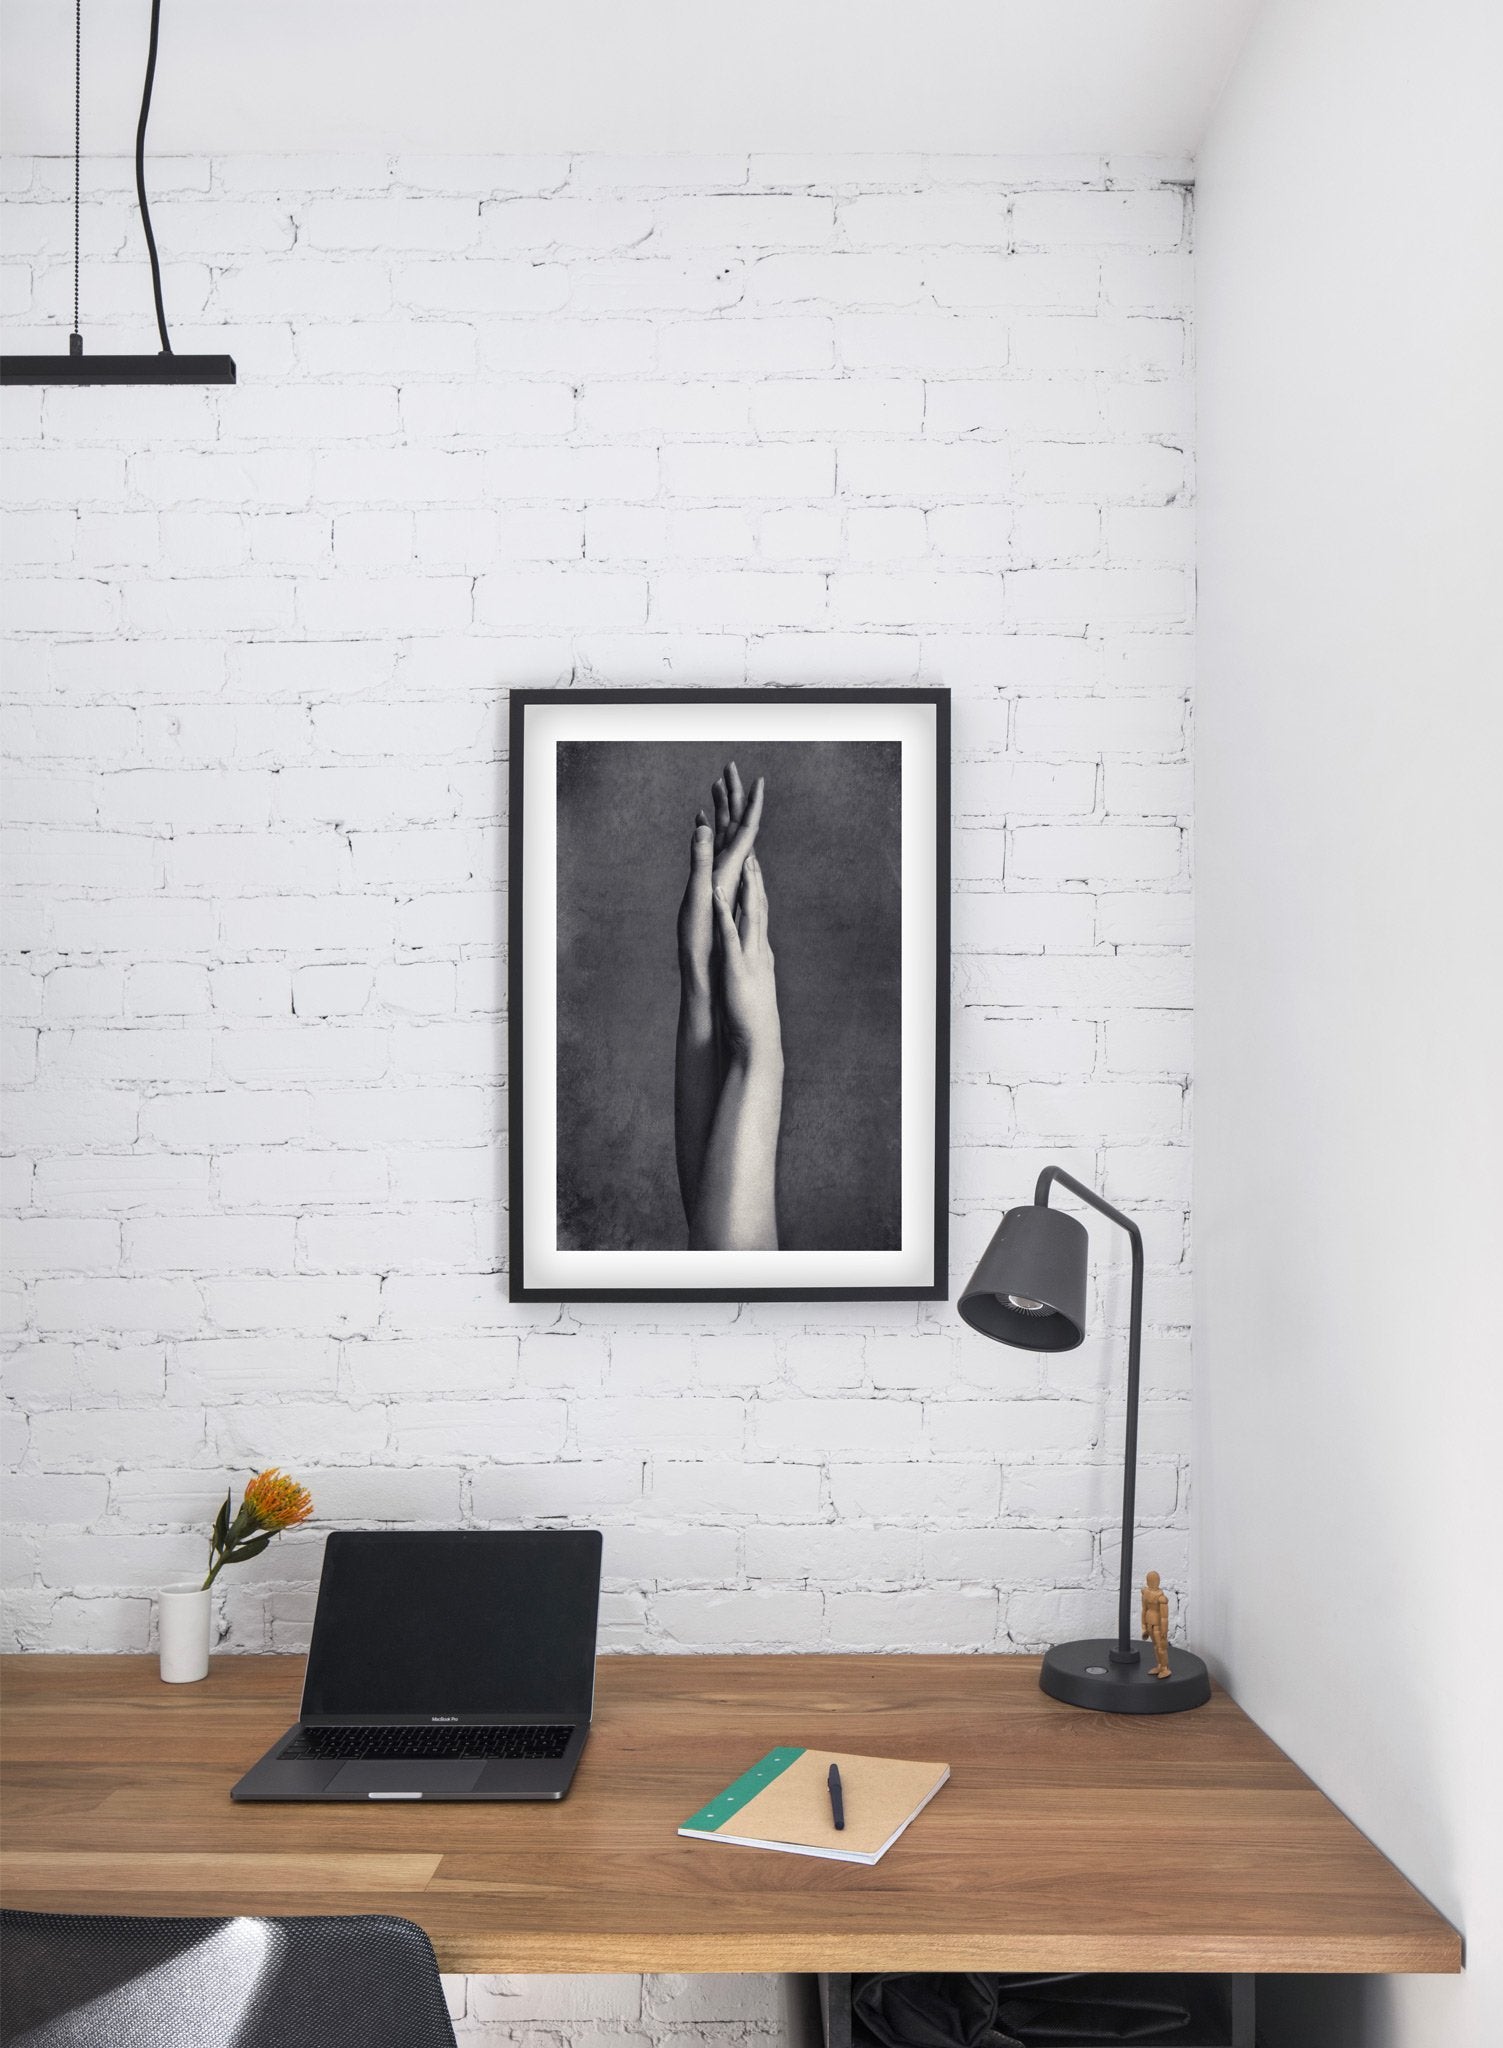 Hands modern minimalist photography poster by Opposite Wall - Desk Office